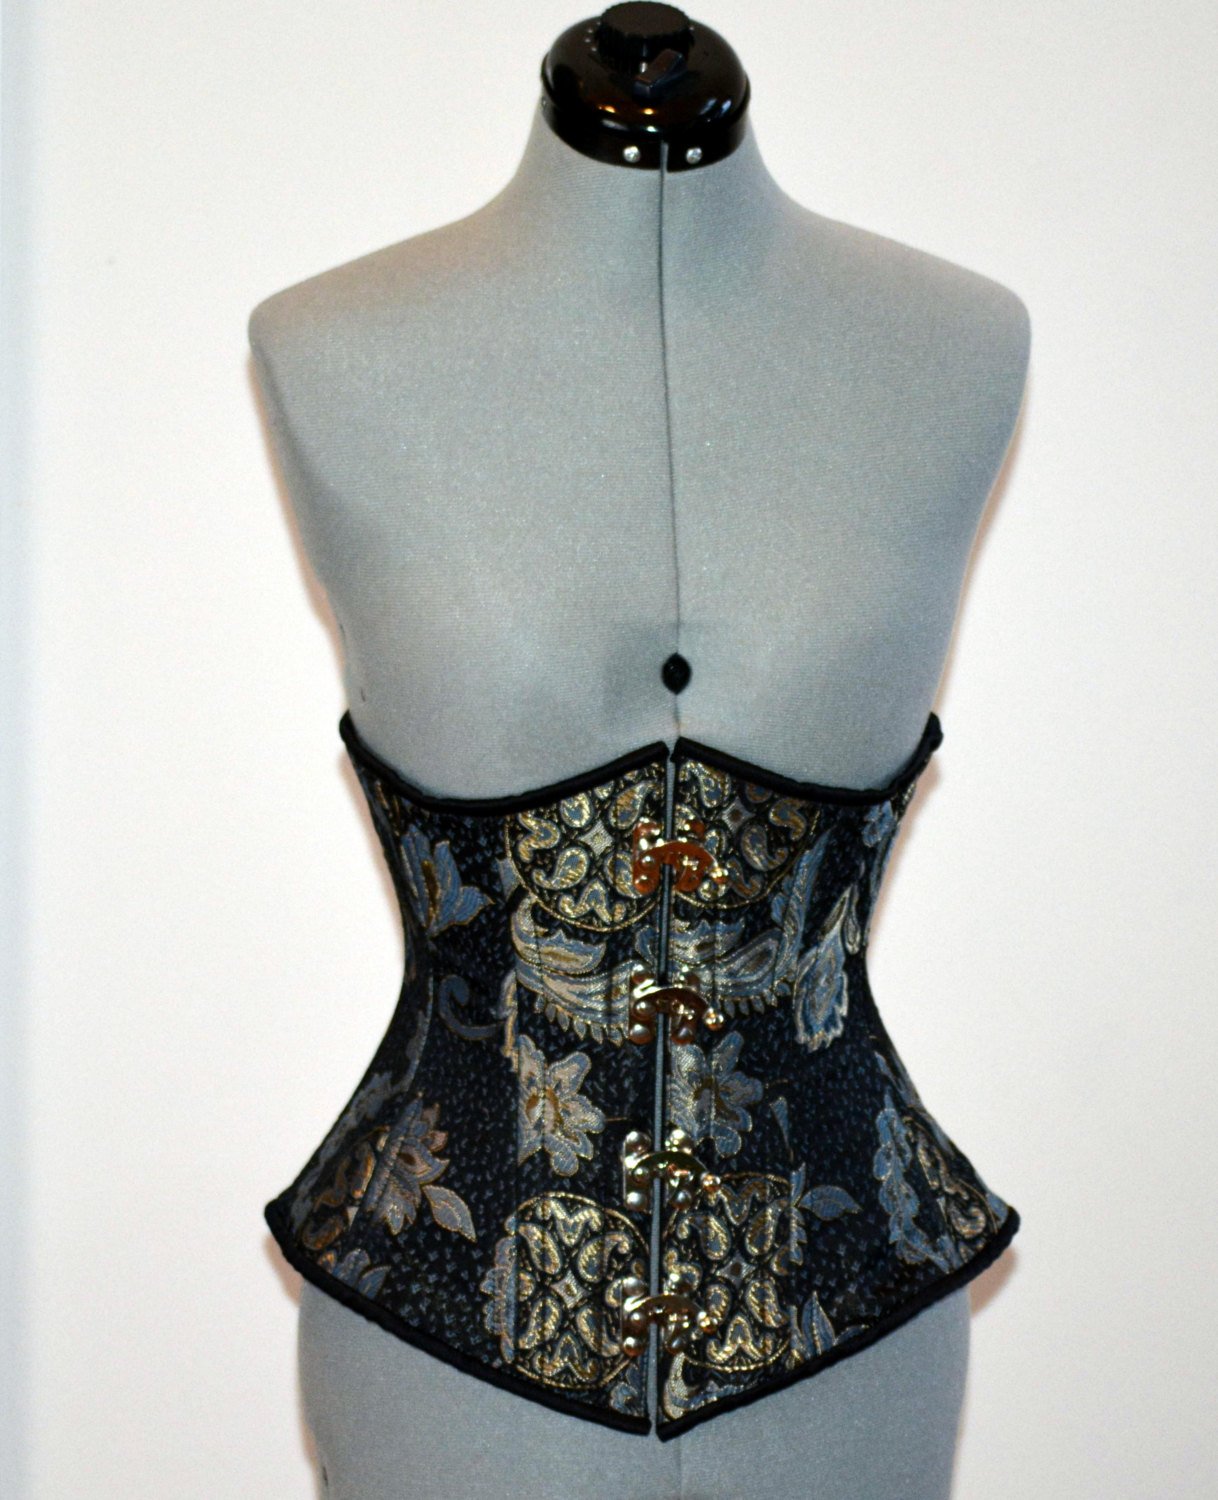 
                  
                    Steel boned underbust steampunk corset from brocade with golden pattern with steampunk hooks. Real waist training corset for tight lacing. Corsettery
                  
                